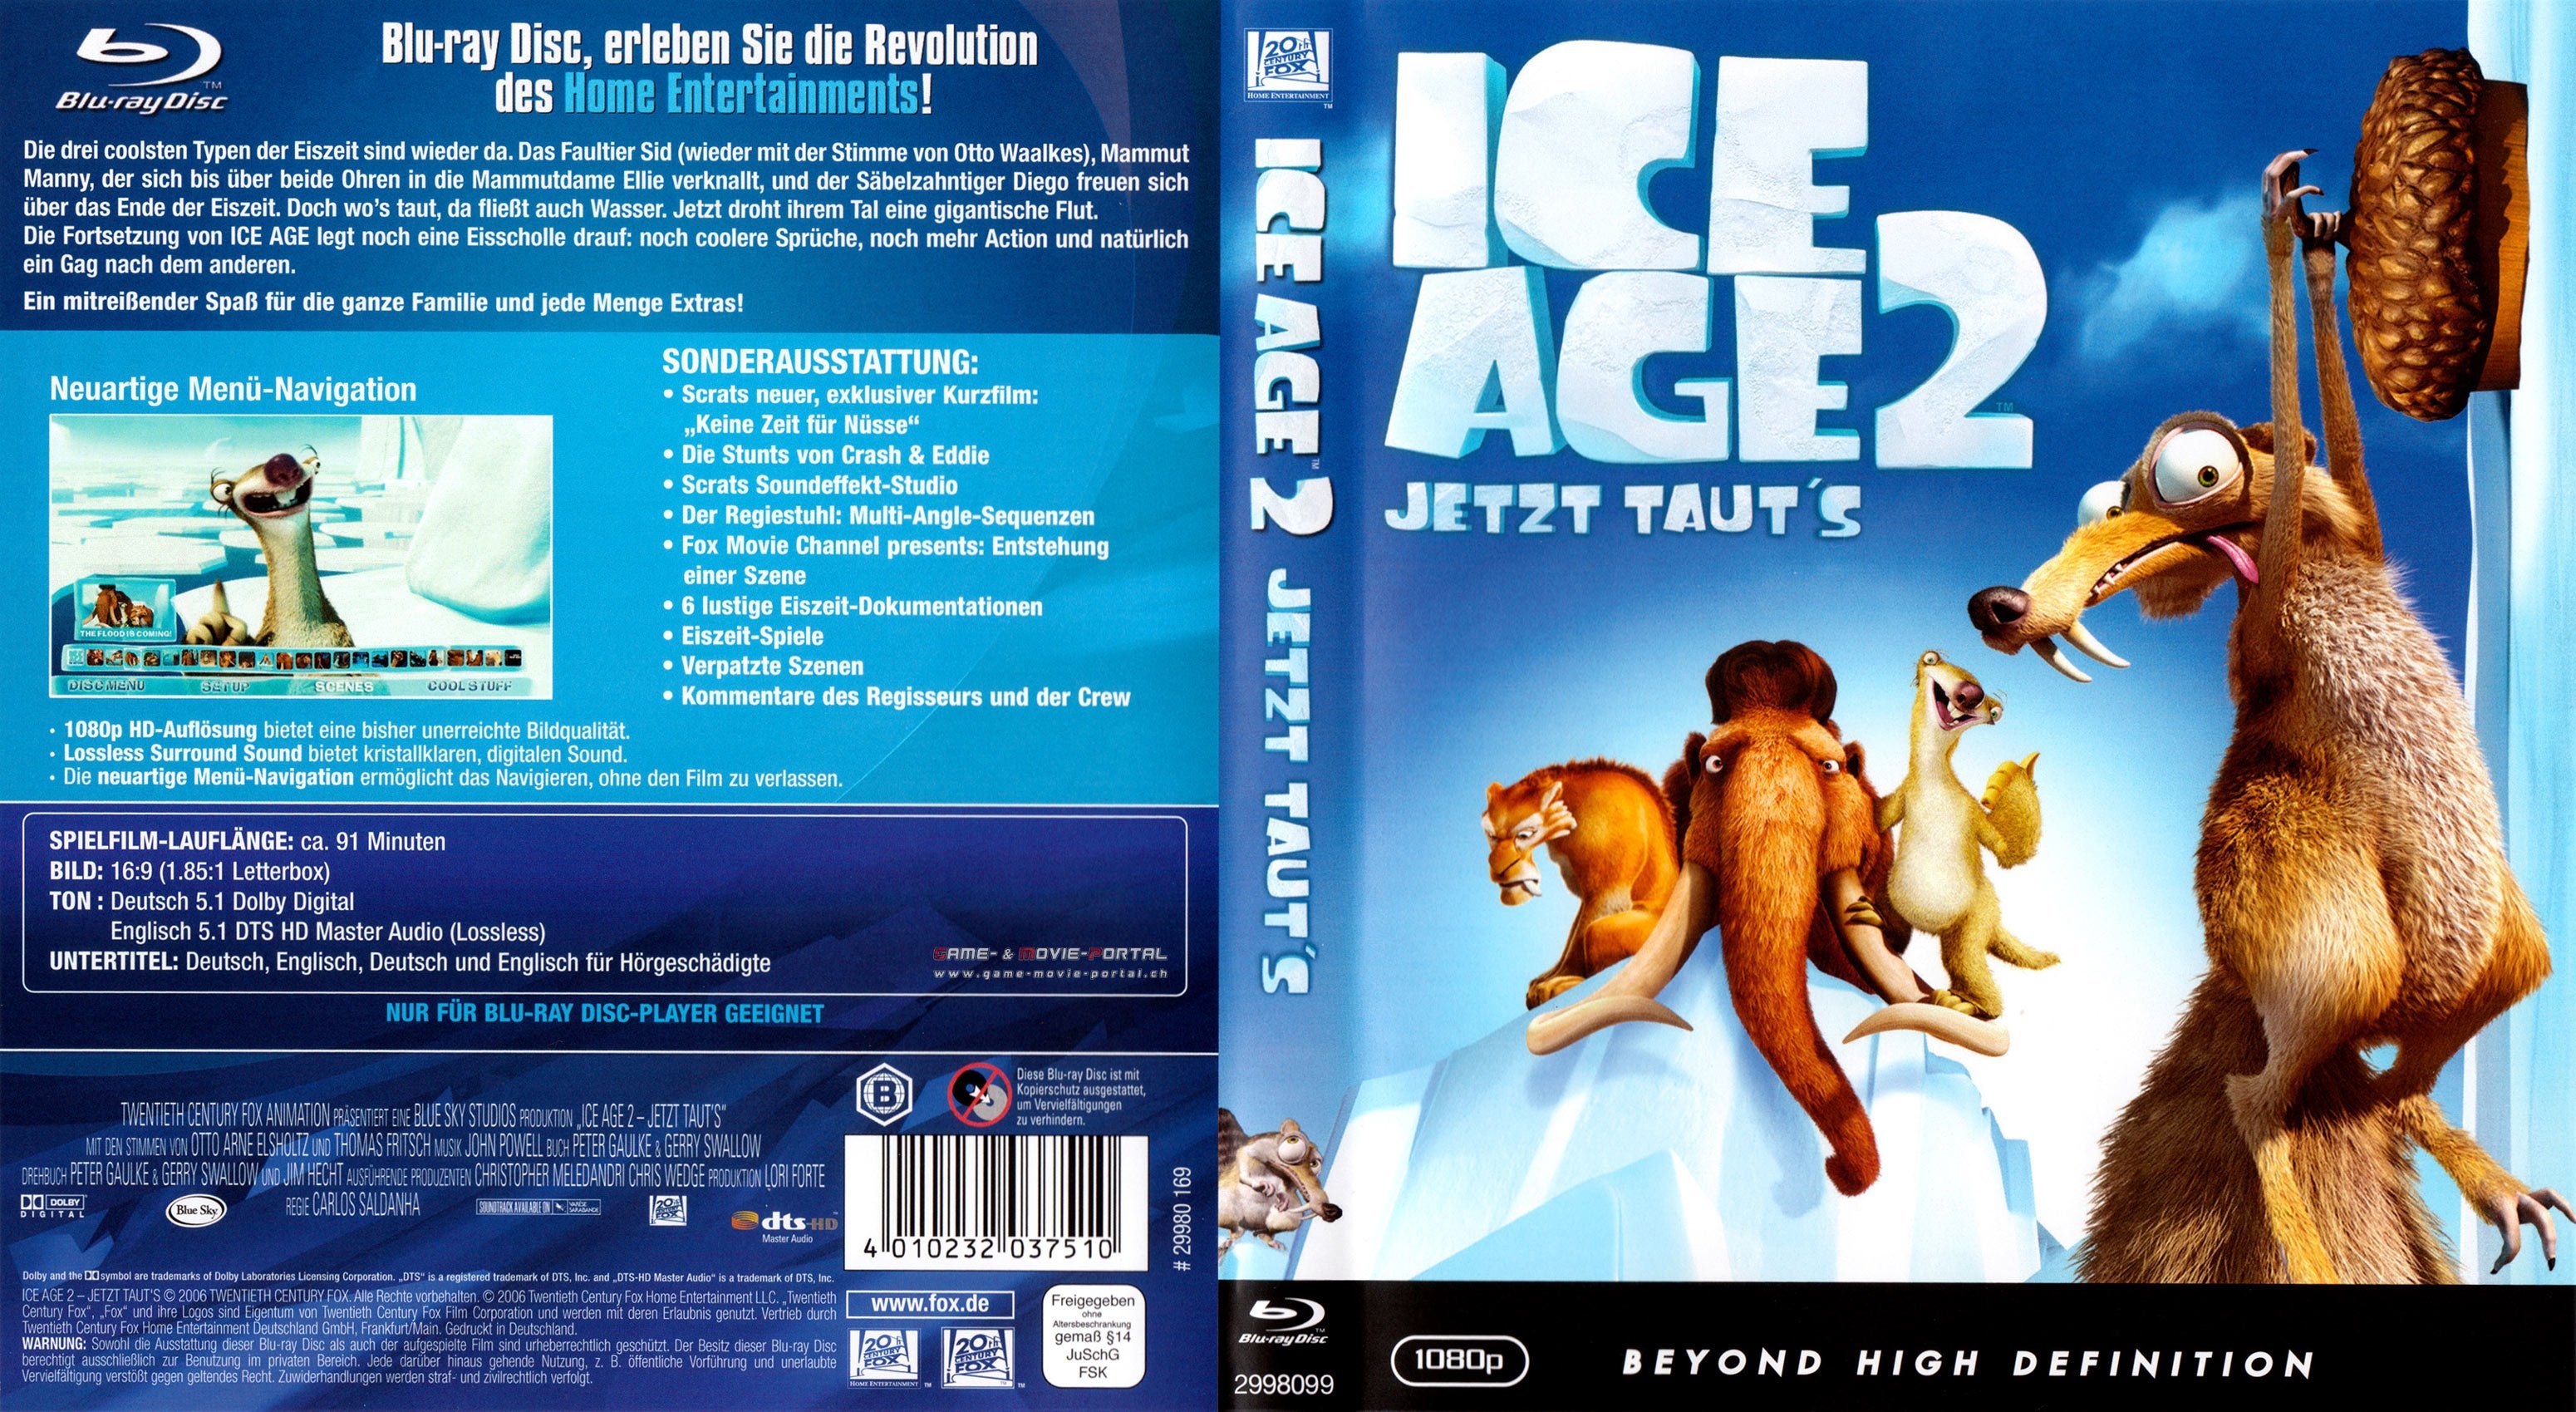 Ice Age 2 Jetzt tauts blu ray cover german German DVD Covers.